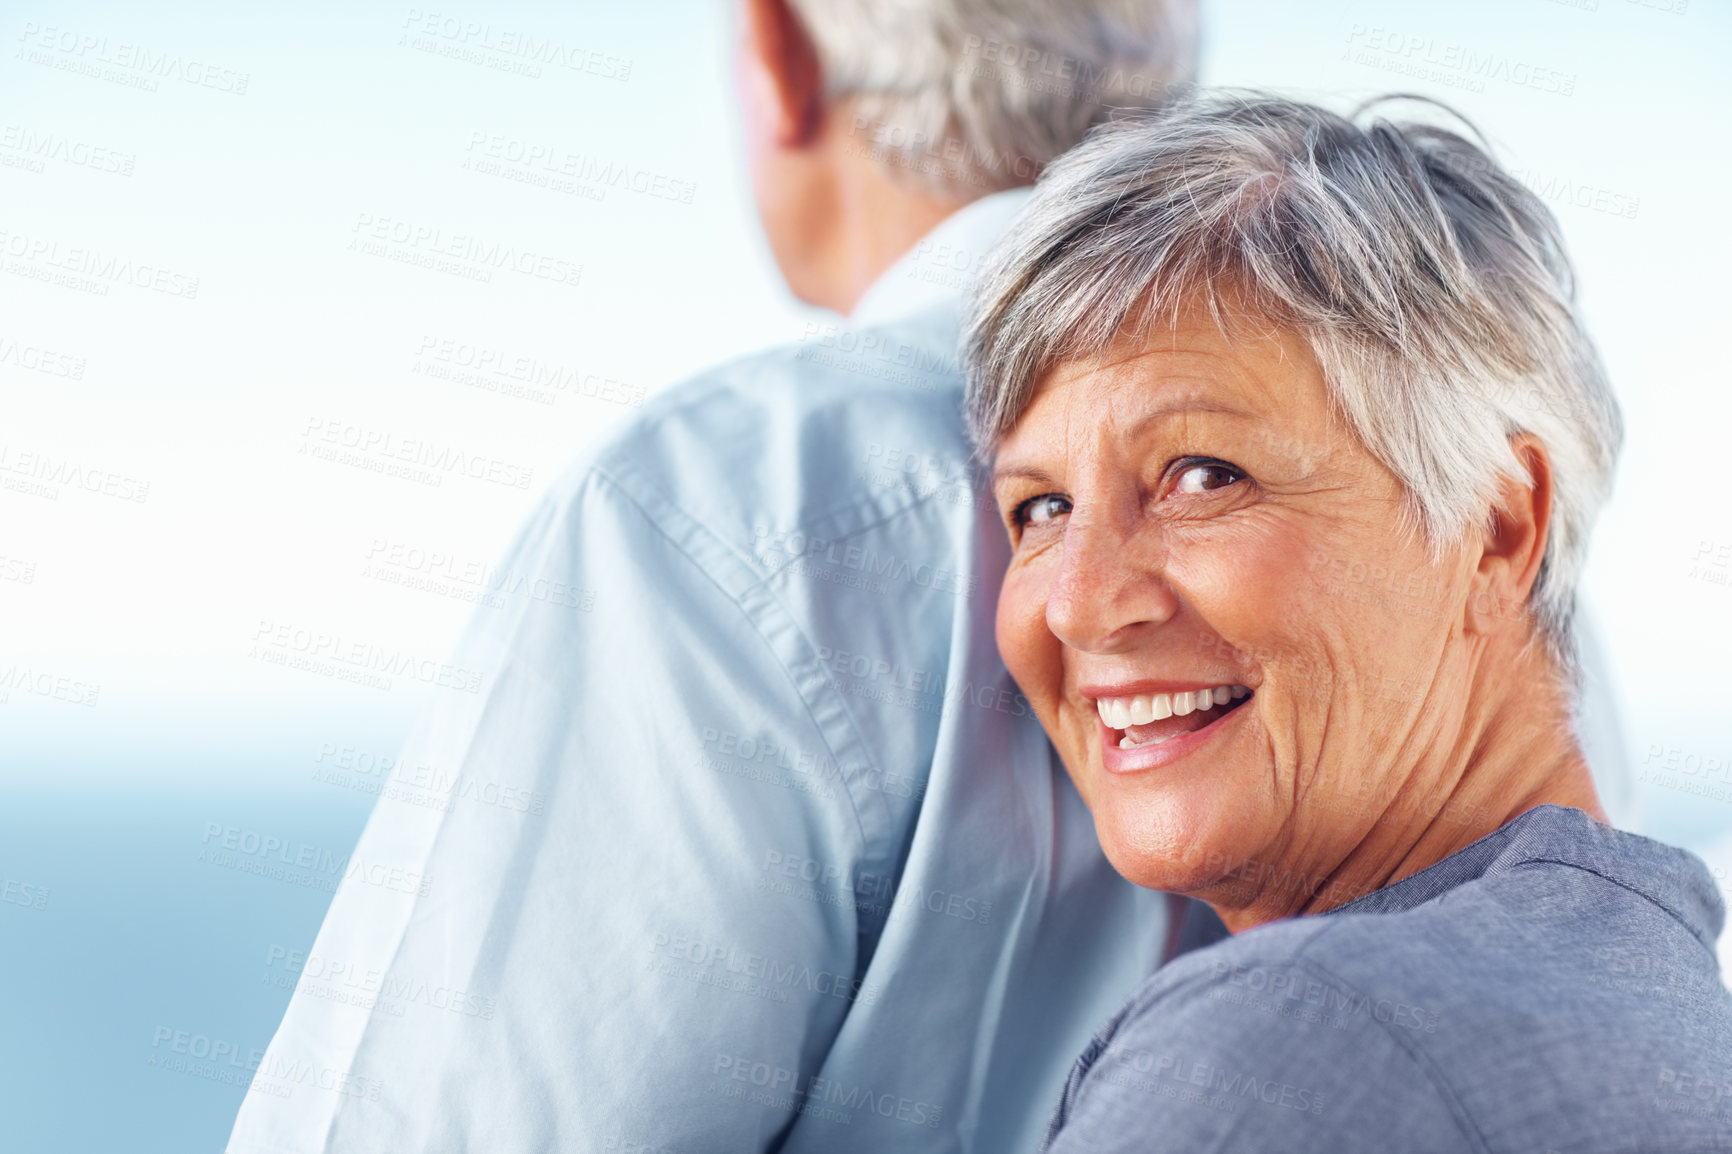 Buy stock photo Portrait of happy mature woman smiling while standing behind man outdoors